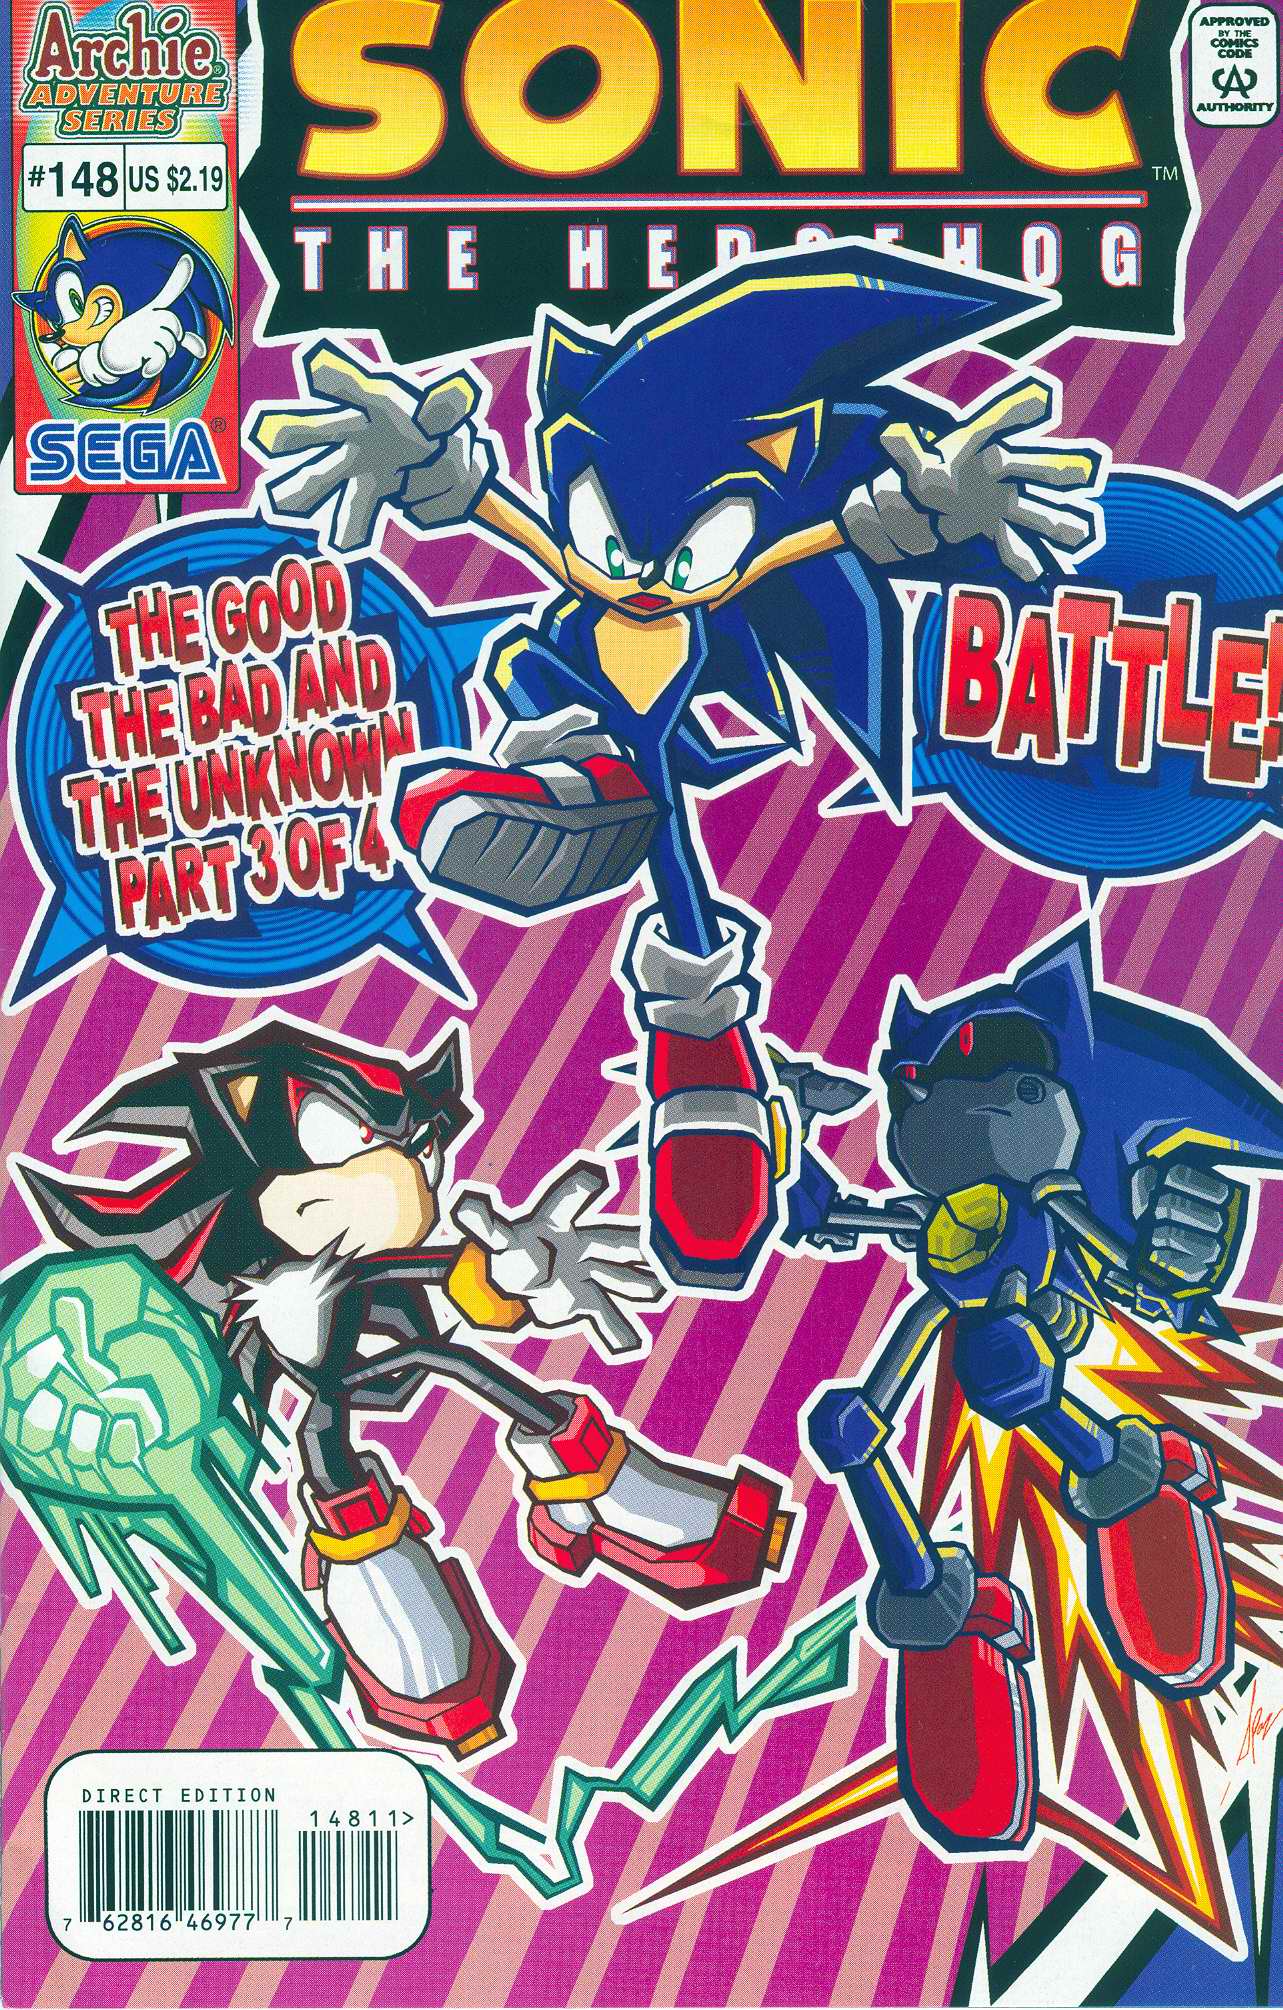 Sonic - Archie Adventure Series June 2005 Cover Page